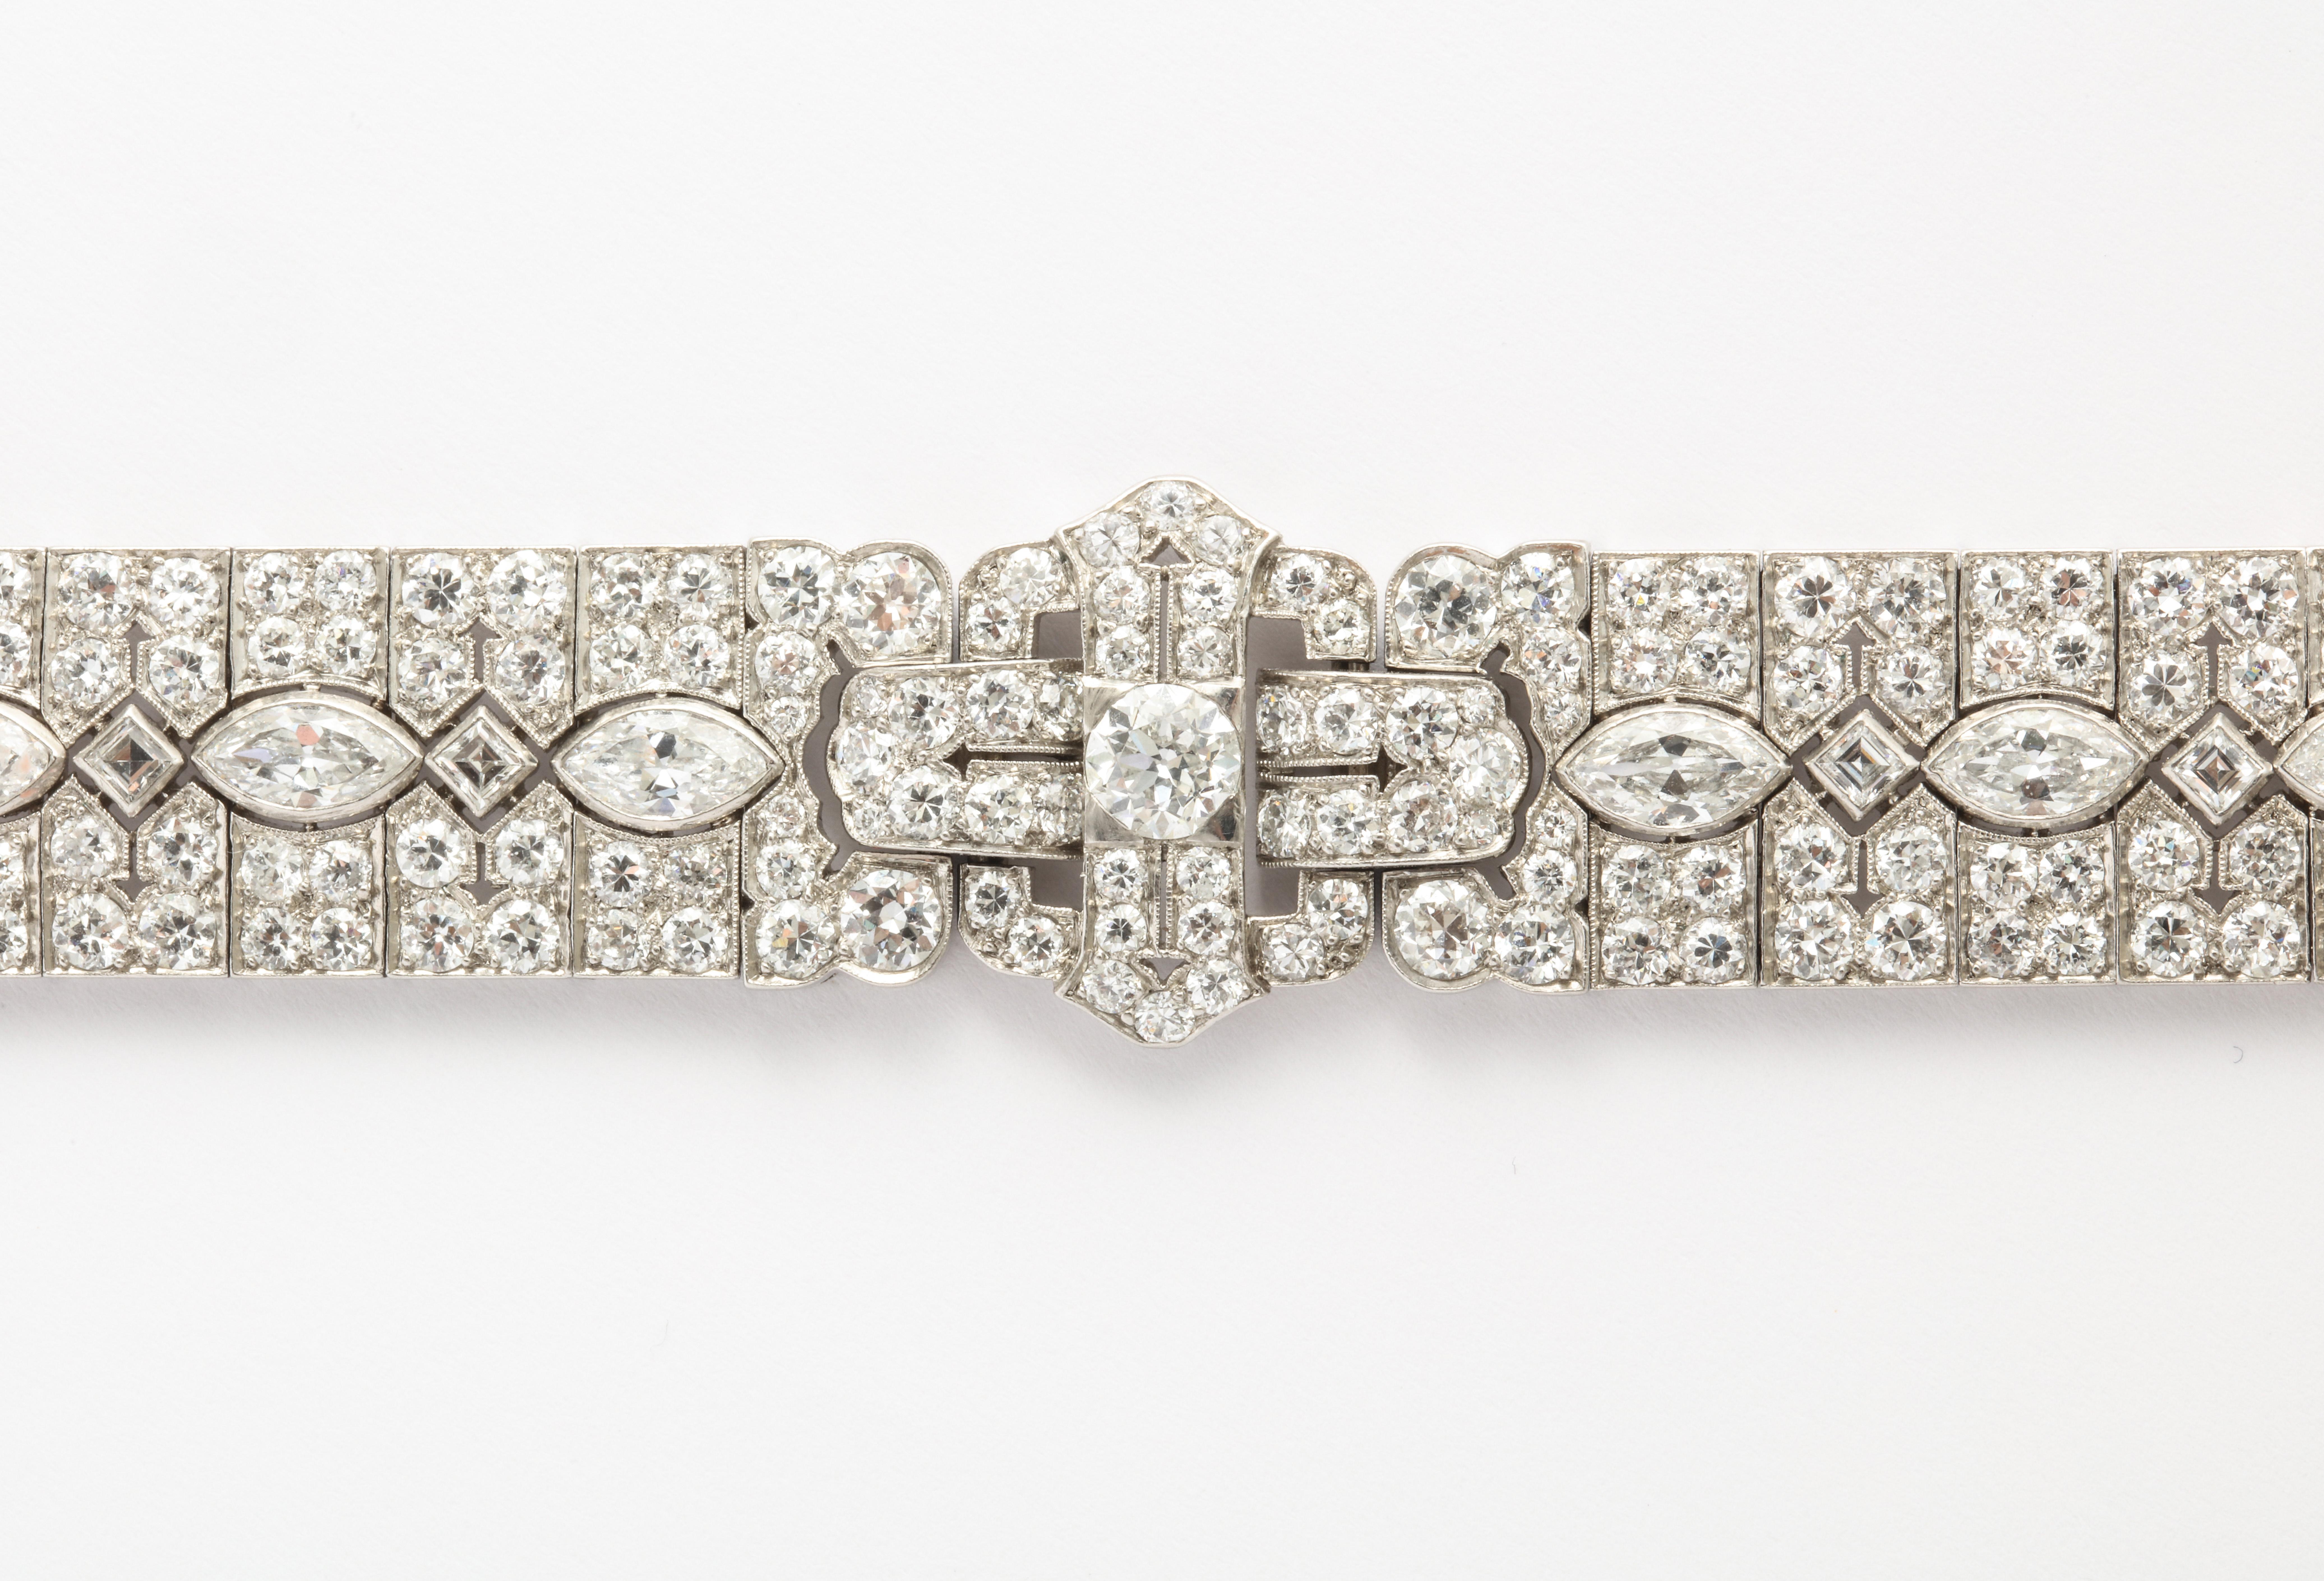 A lovely and wearable platinum & diamond Art Deco period bracelet with 18KYG clasp
by Tiffany & Co., circa 1925.
The estimated weight of the diamonds is 16.50 carats, conservatively.
The quality of the diamonds appear to be H-I color and VS1-SI1